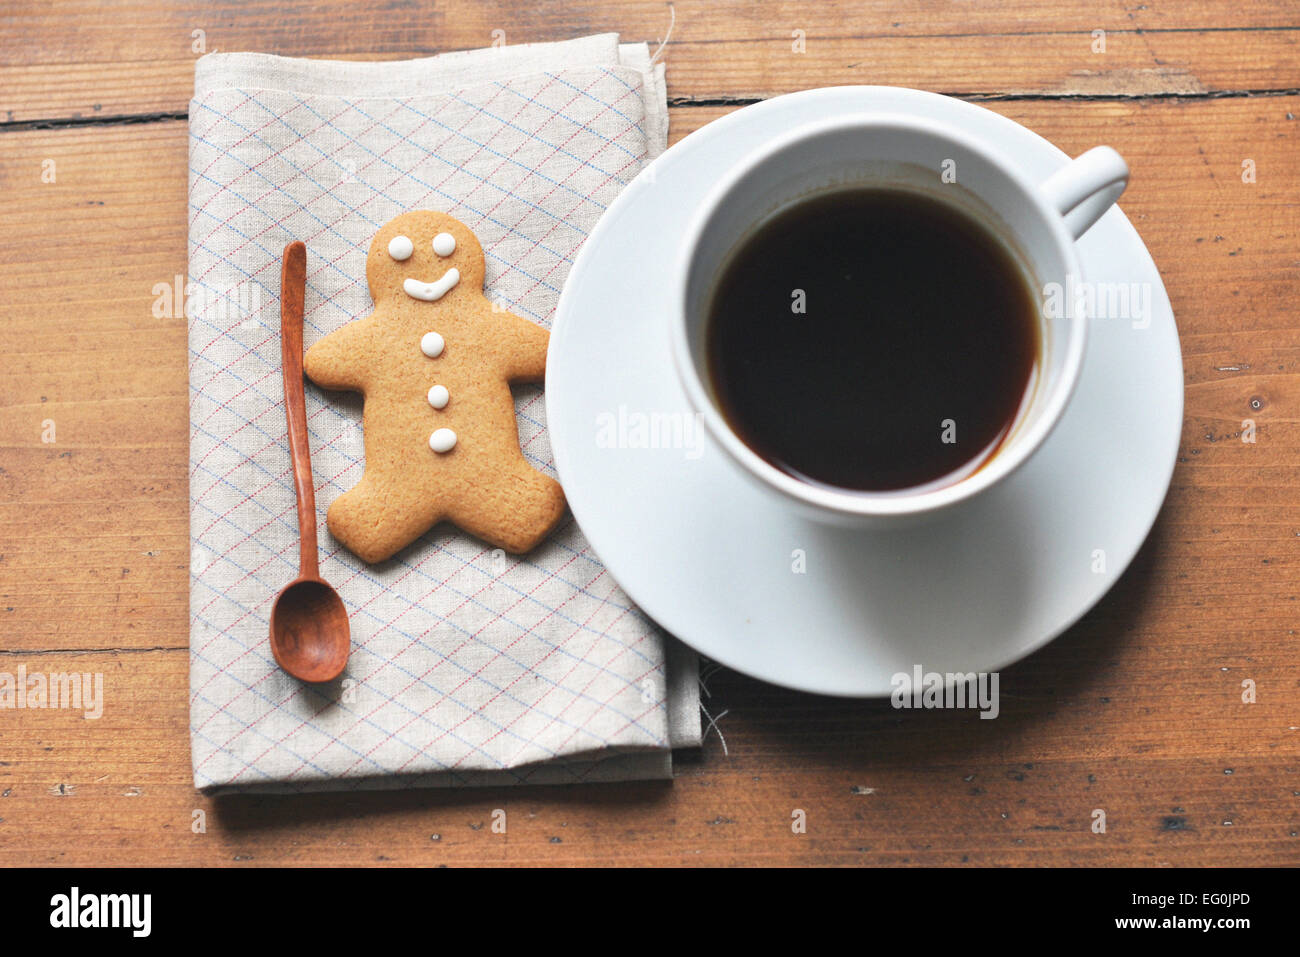 Cup of coffee and gingerbread man with spoon on wooden table Stock Photo